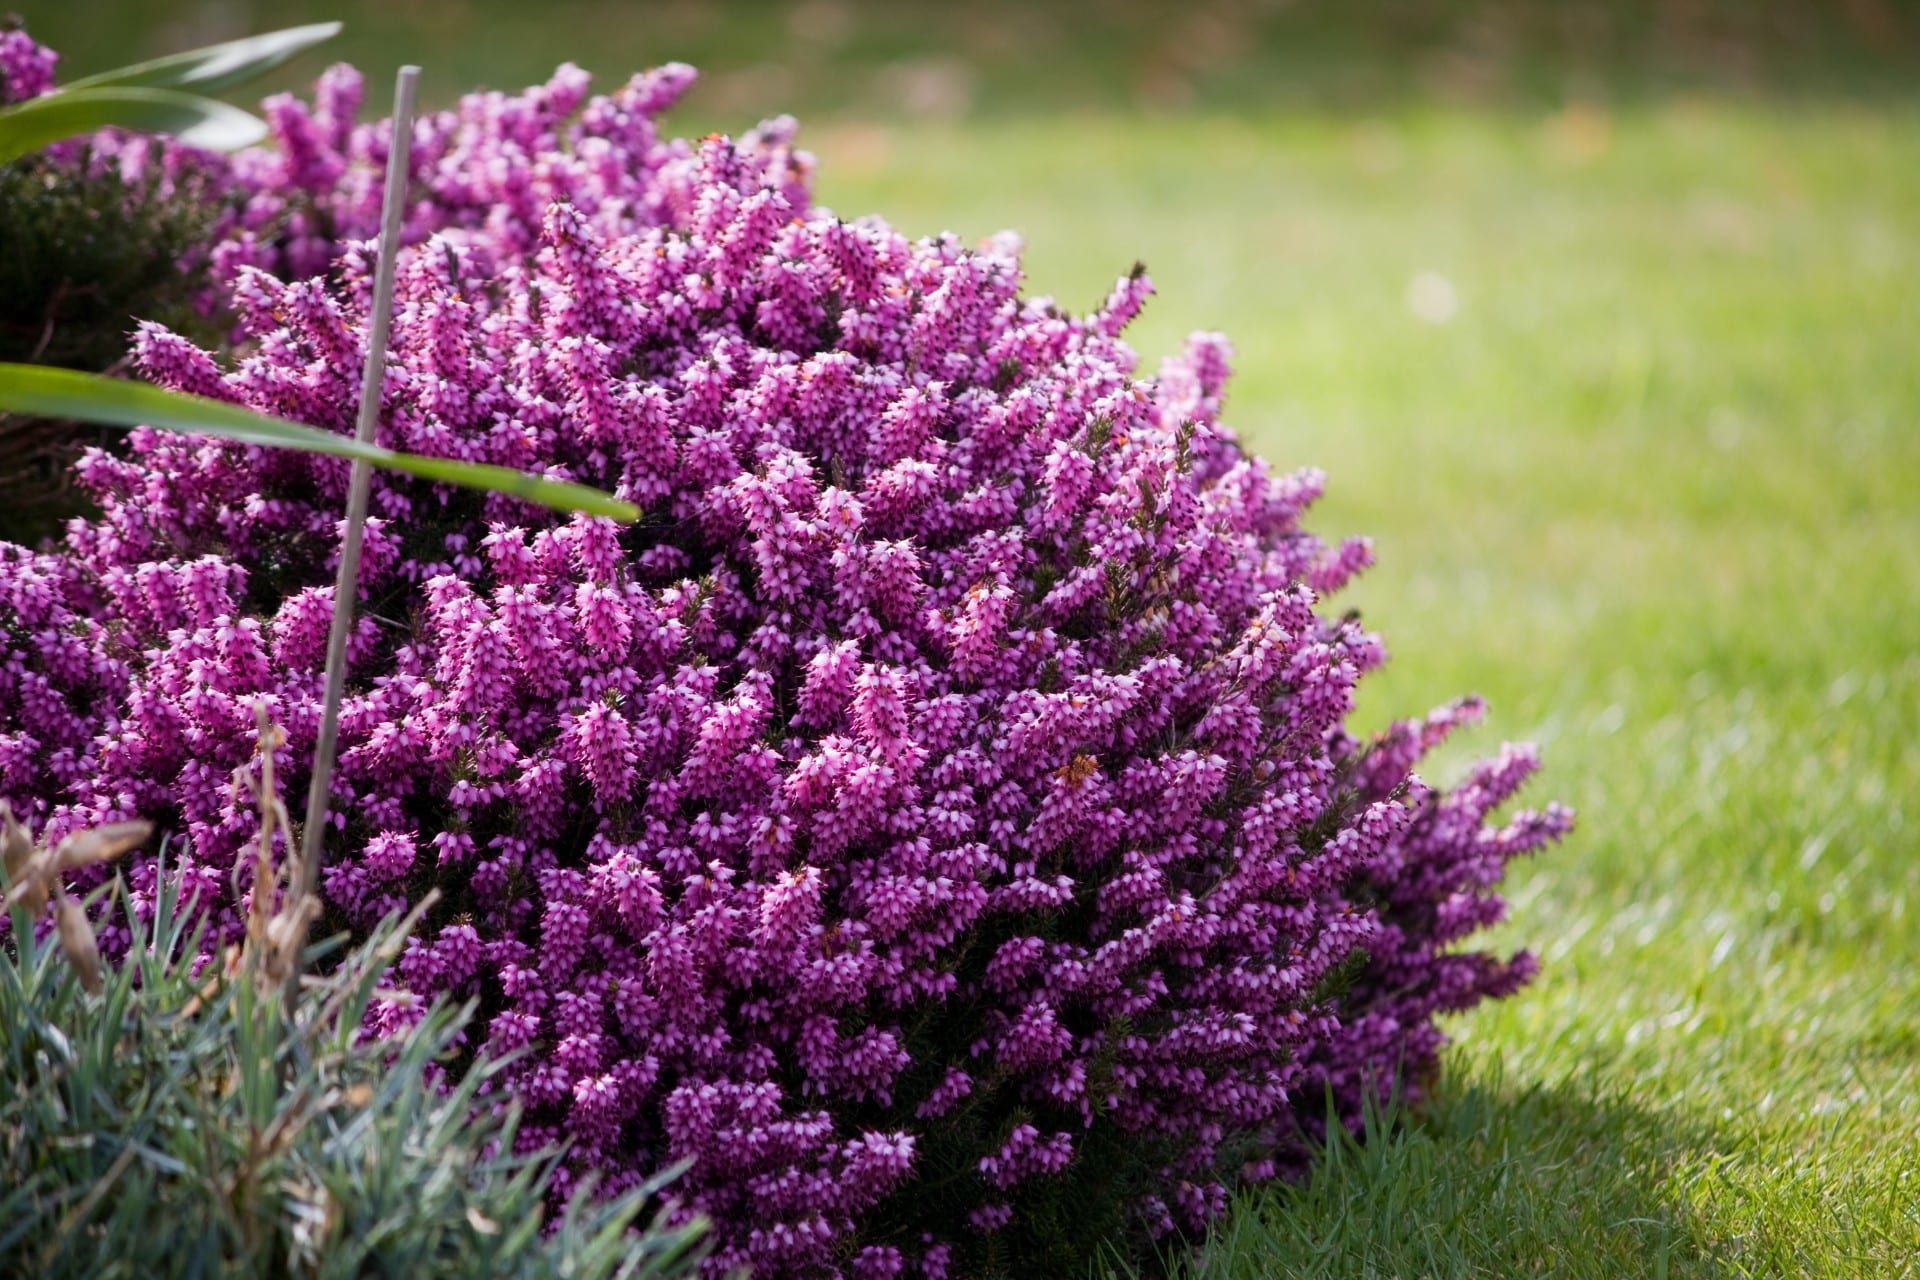 purple heather flowers at risk of extinction in the uk. Photo: Wikimedia Commons: